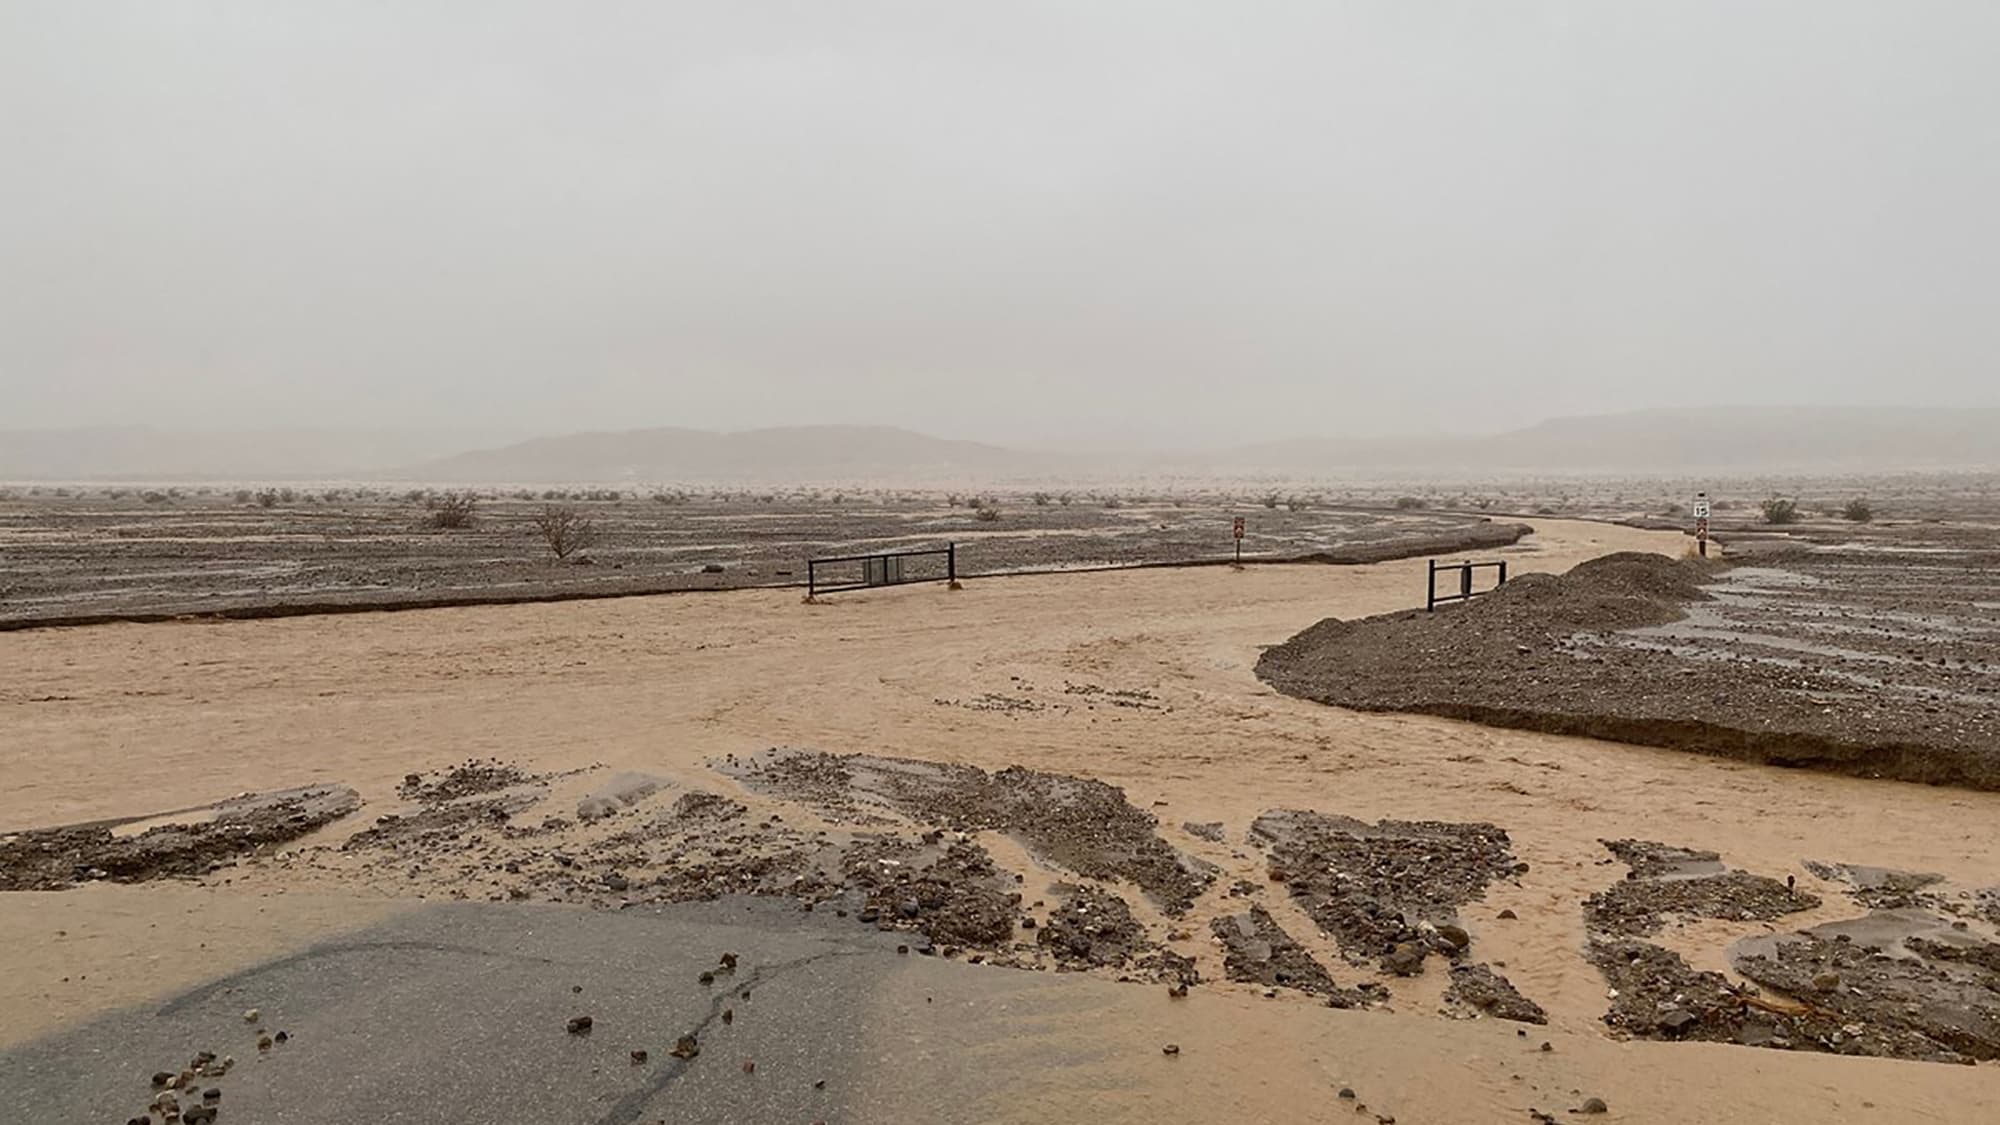 exceptional floods in Death Valley, known as "the driest place in the